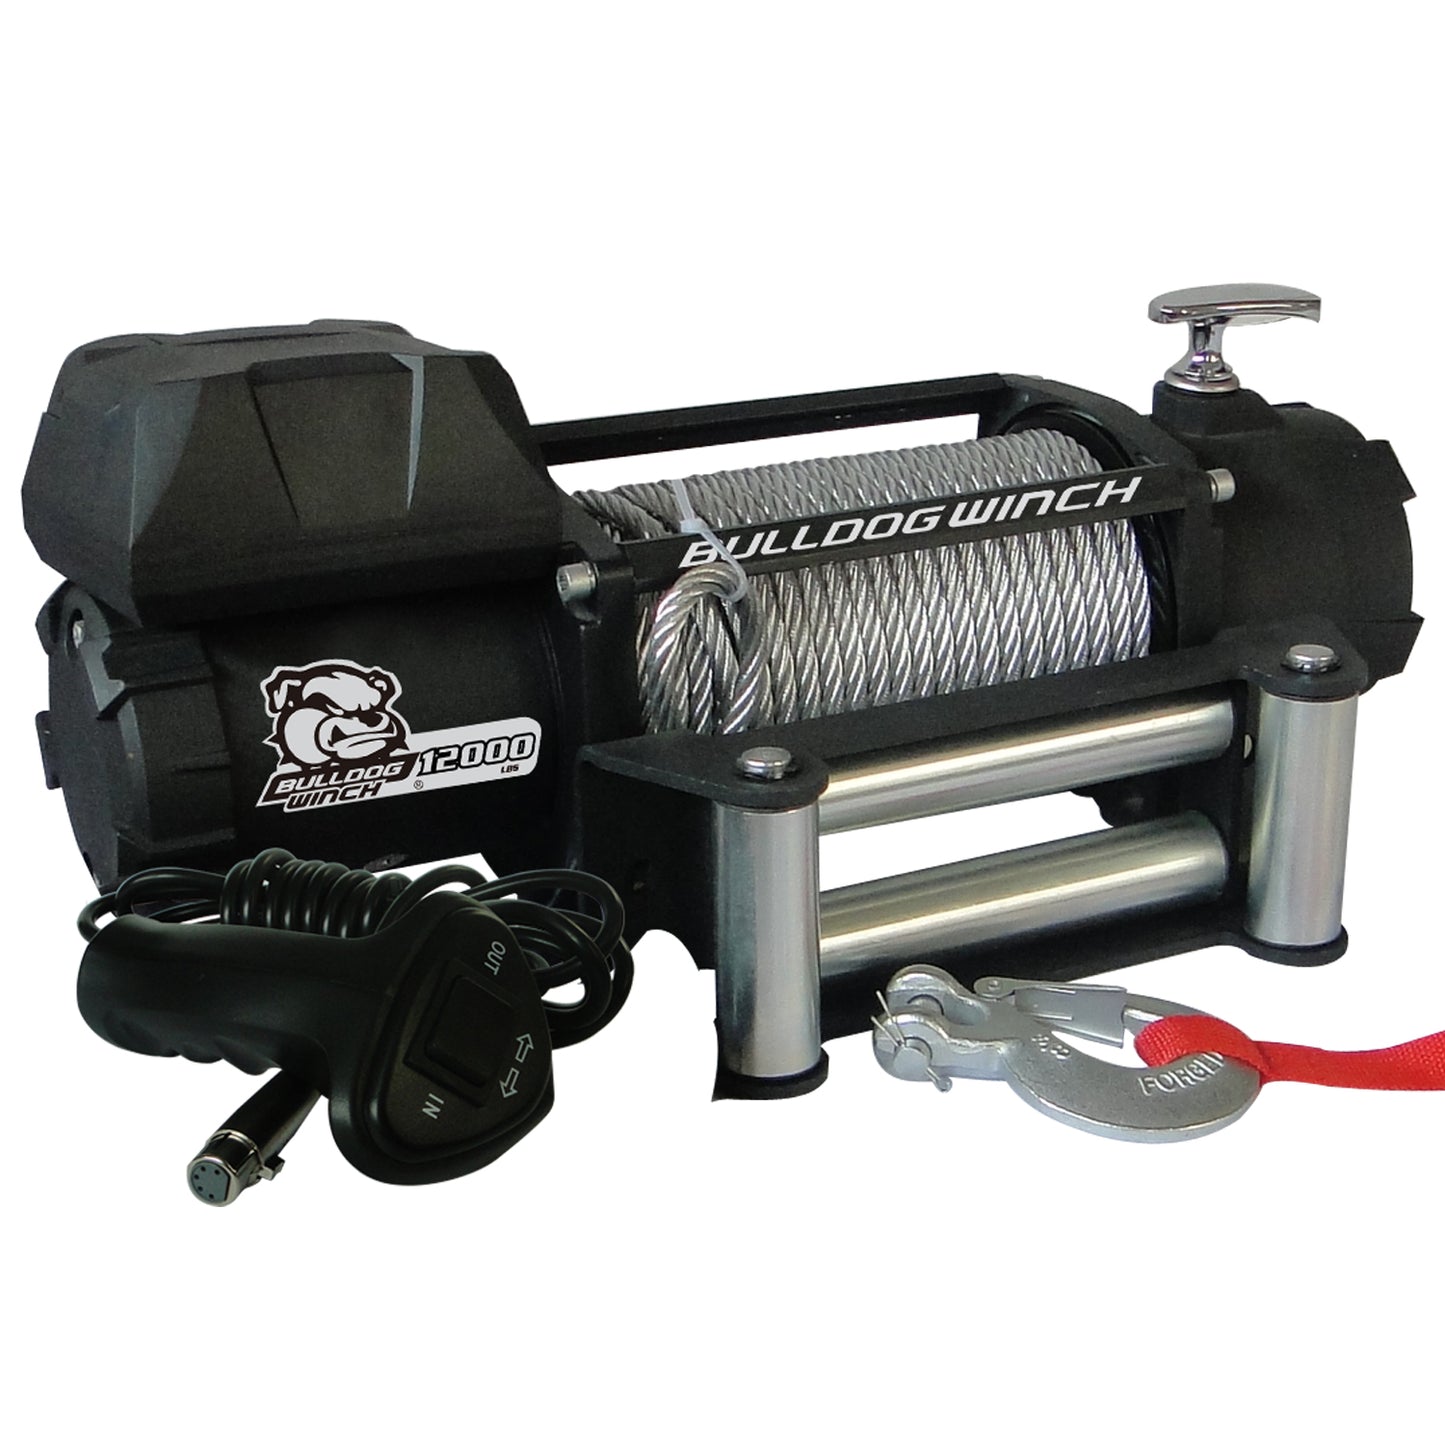 Bulldog Winch 12,00 LB Winch 100 Ft Wire Rope 6.0hp Series Wound Motor Roller Fairlead